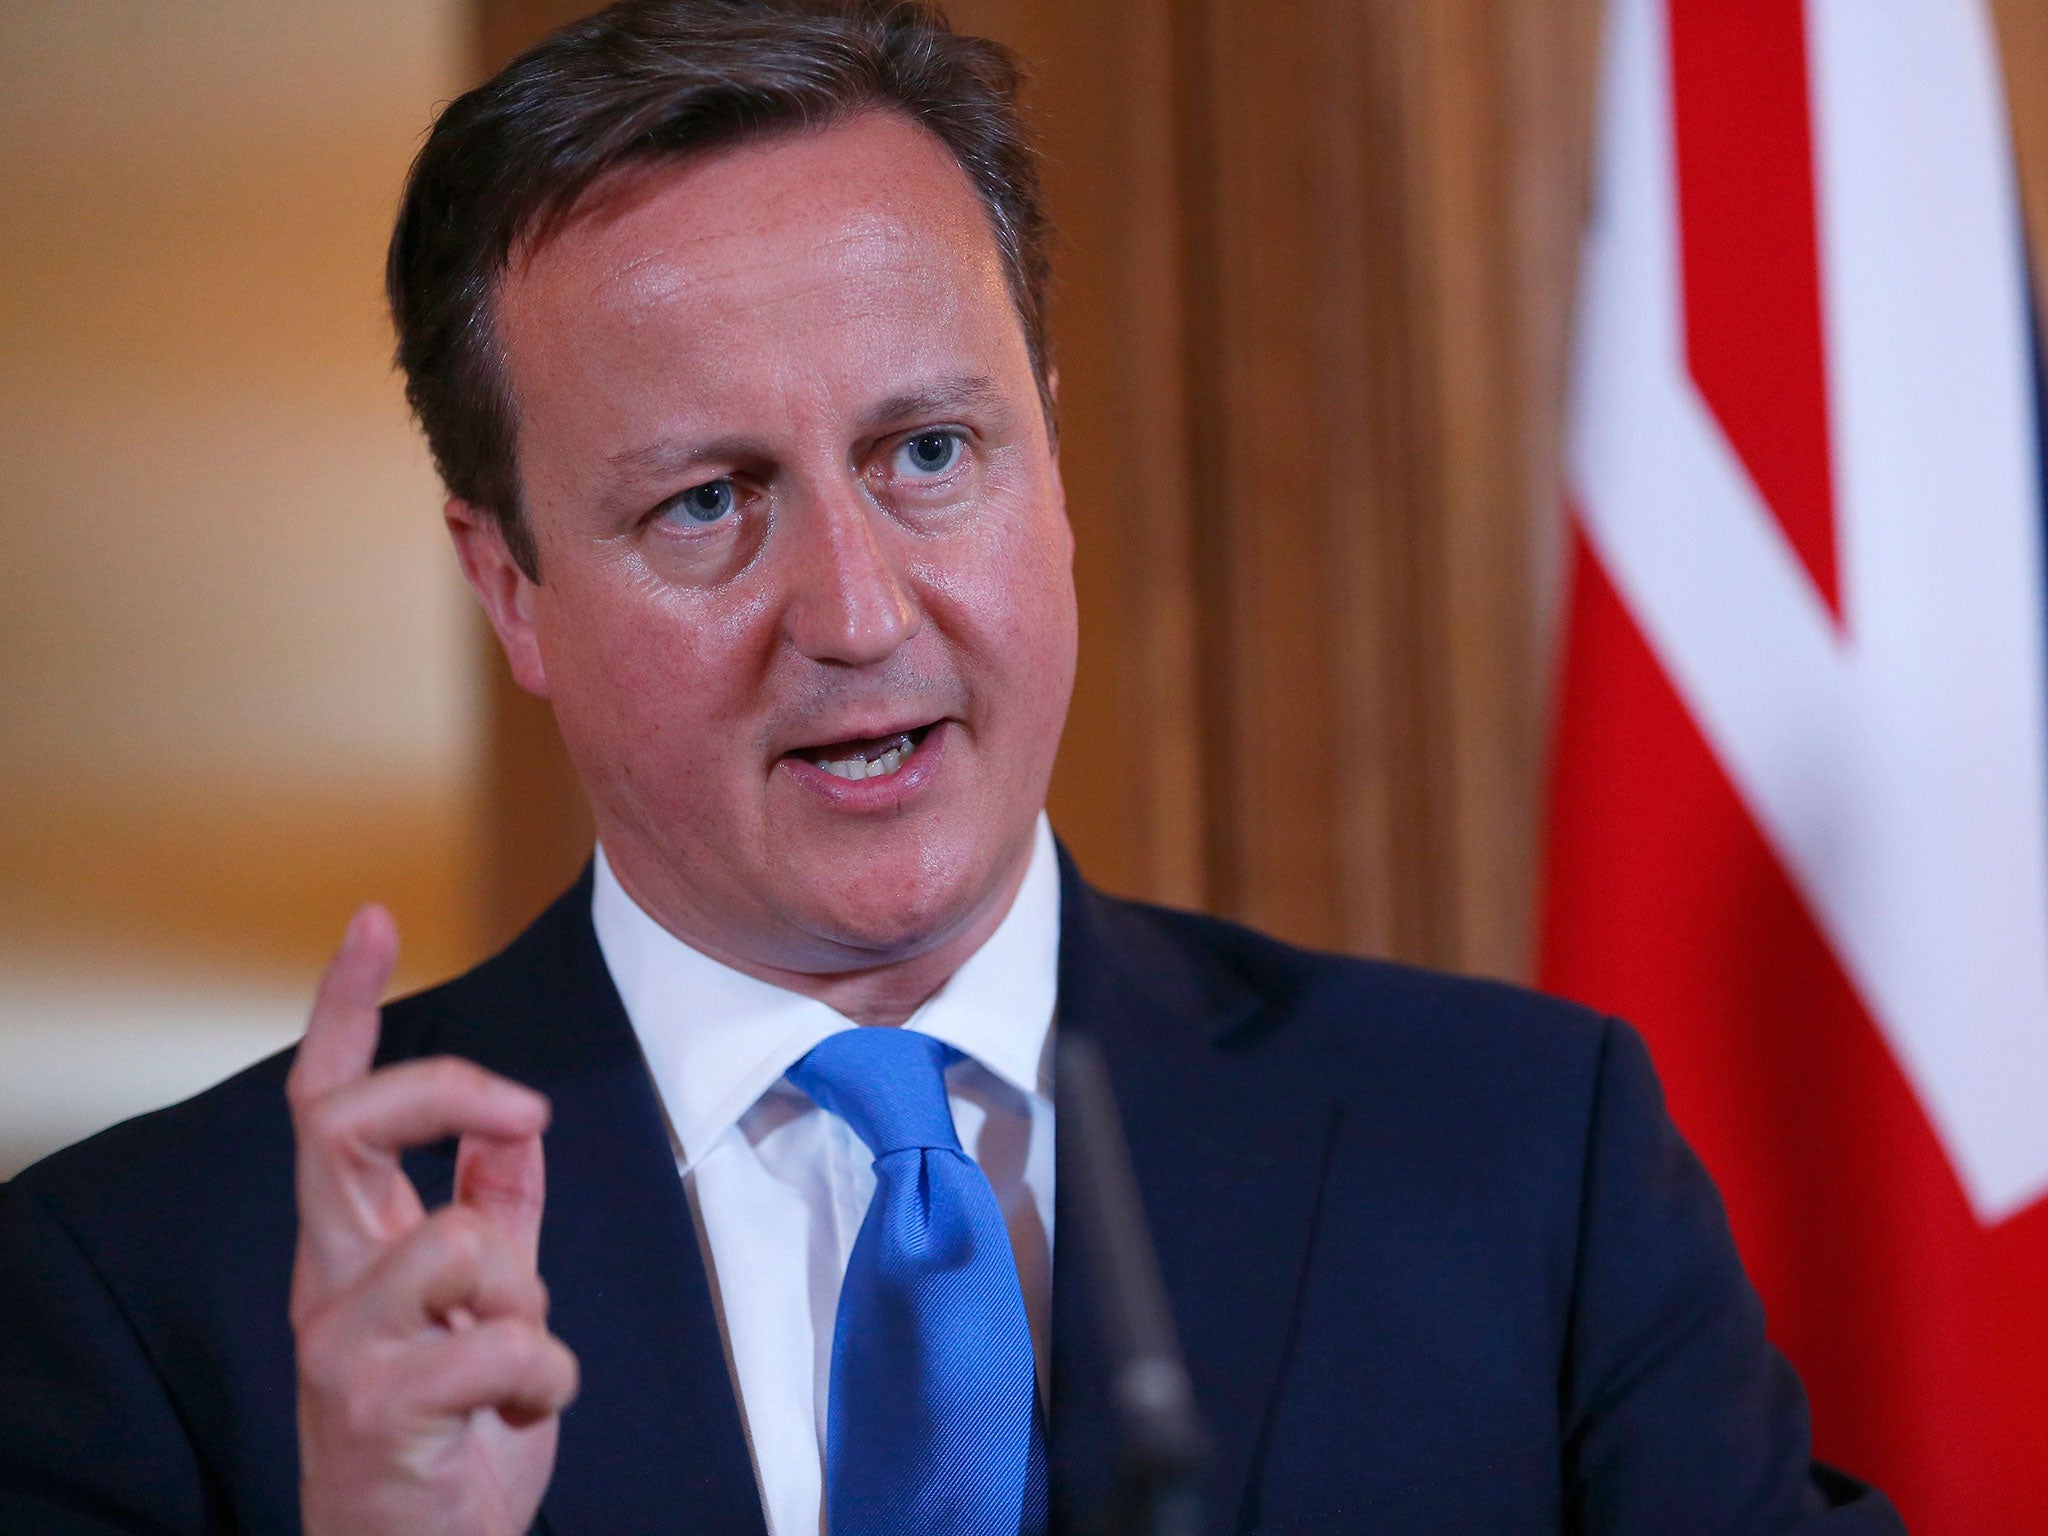 Prime Minister David Cameron has said Labour leader Jeremy Corbyn is a threat to national security